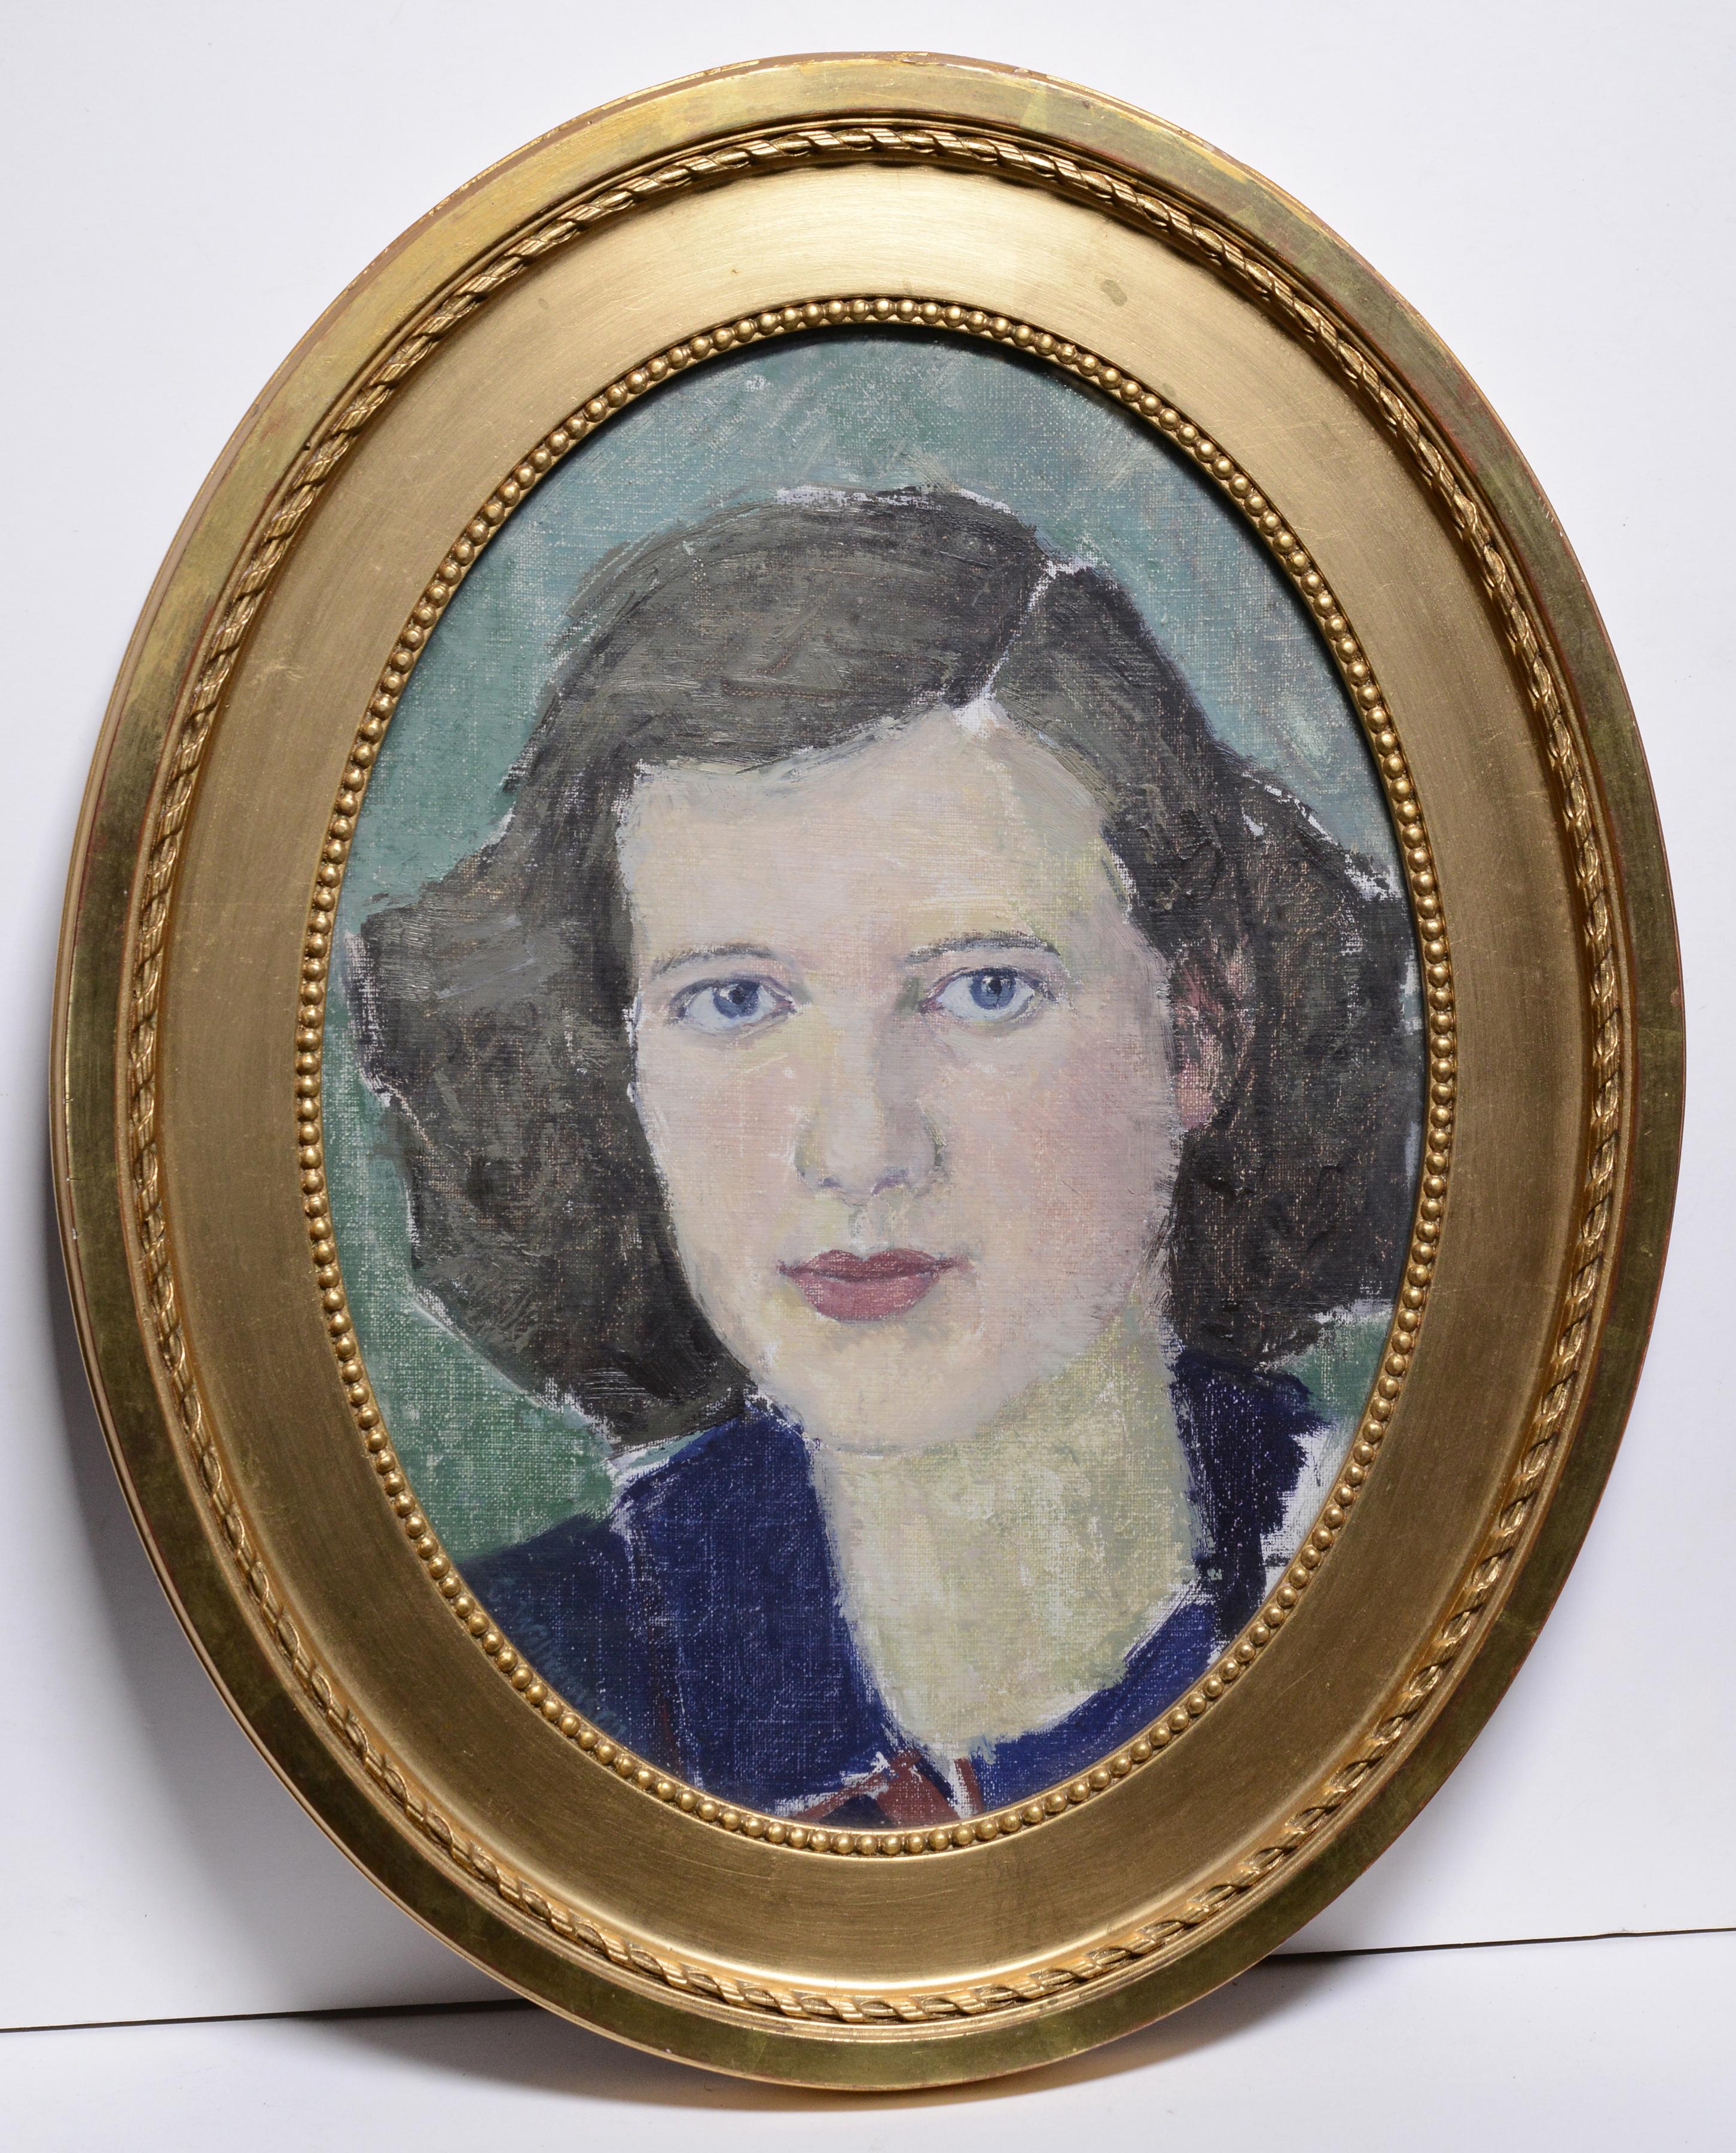 Unknown Portrait Painting - Blue-Eyed Young Woman Portrait Framed Oval by Swedish Master early 20th century